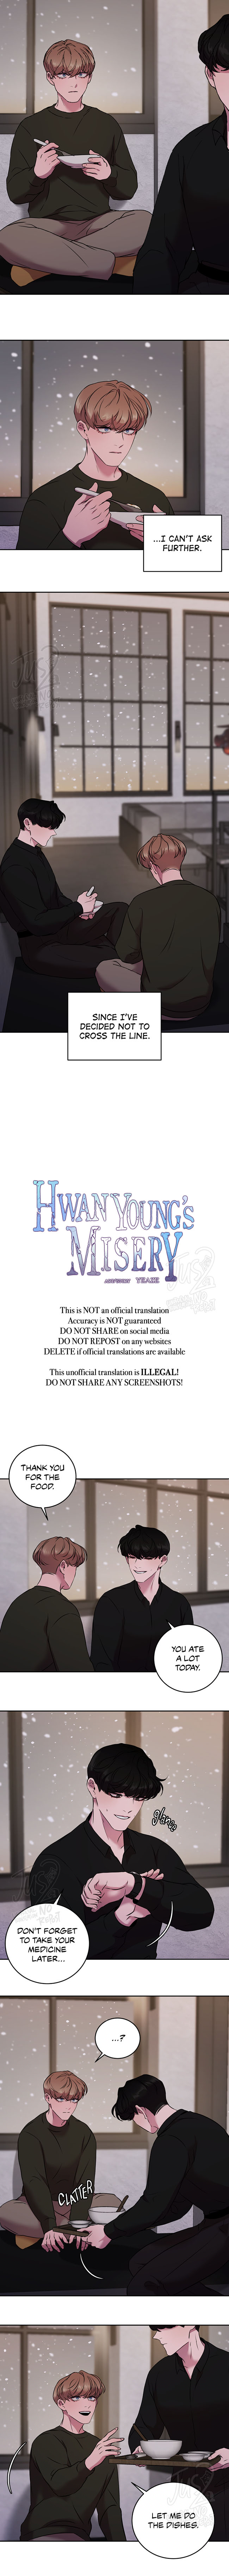 Hwanyoung's Misery - Page 3